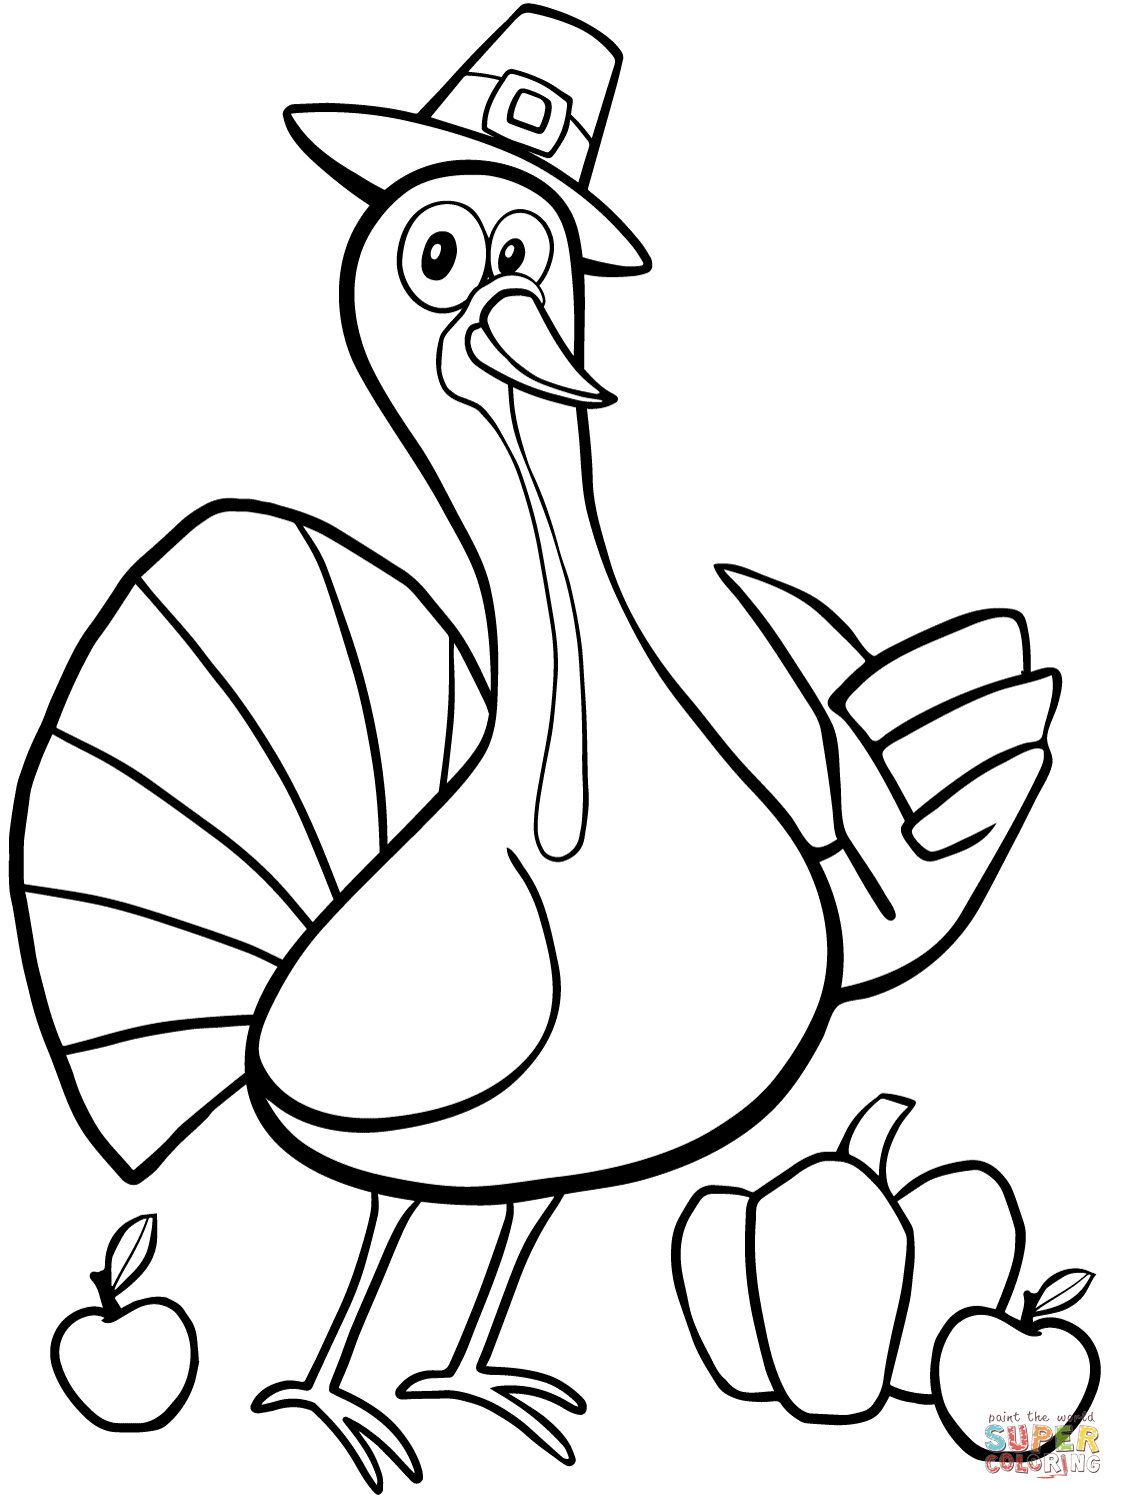 Cool Thanksgiving Turkey Coloring Page | Free Printable Coloring Pages - Free Printable Turkey Coloring Pages